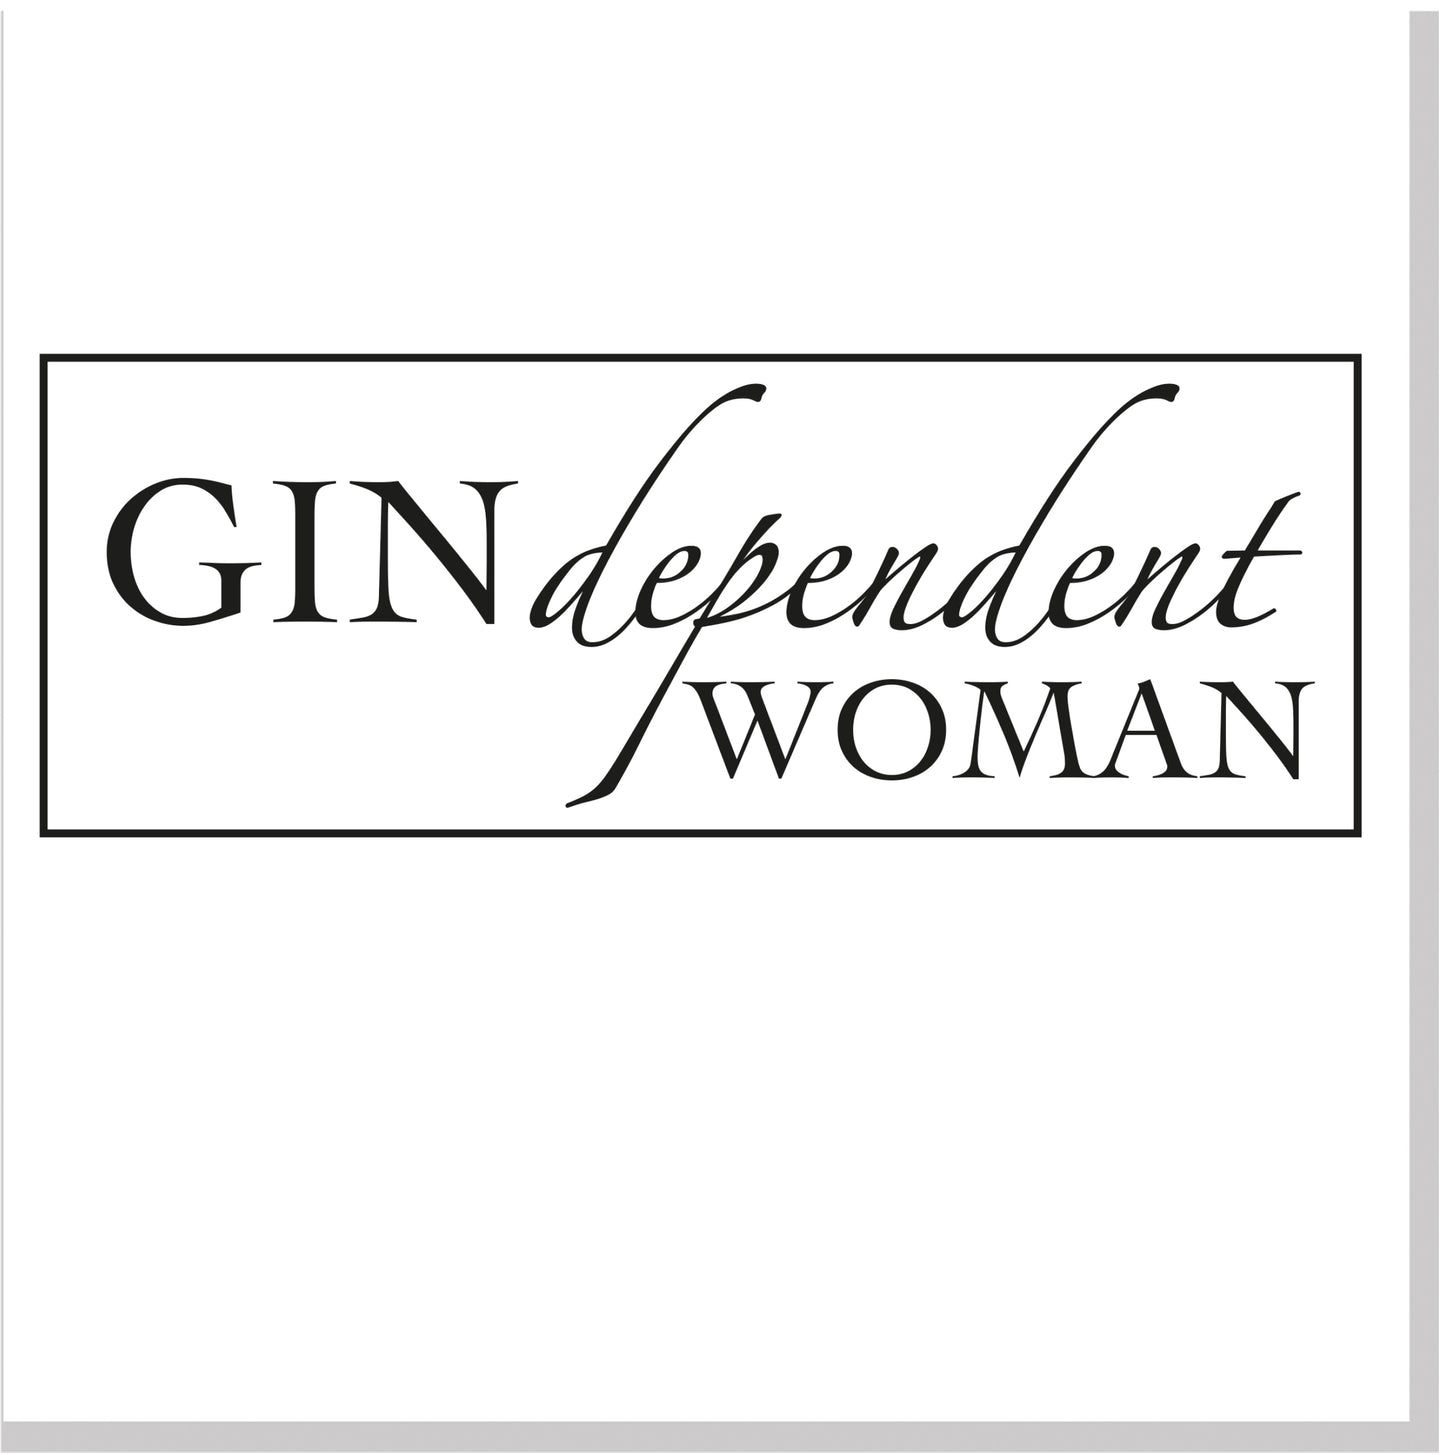 Gindependent woman square card